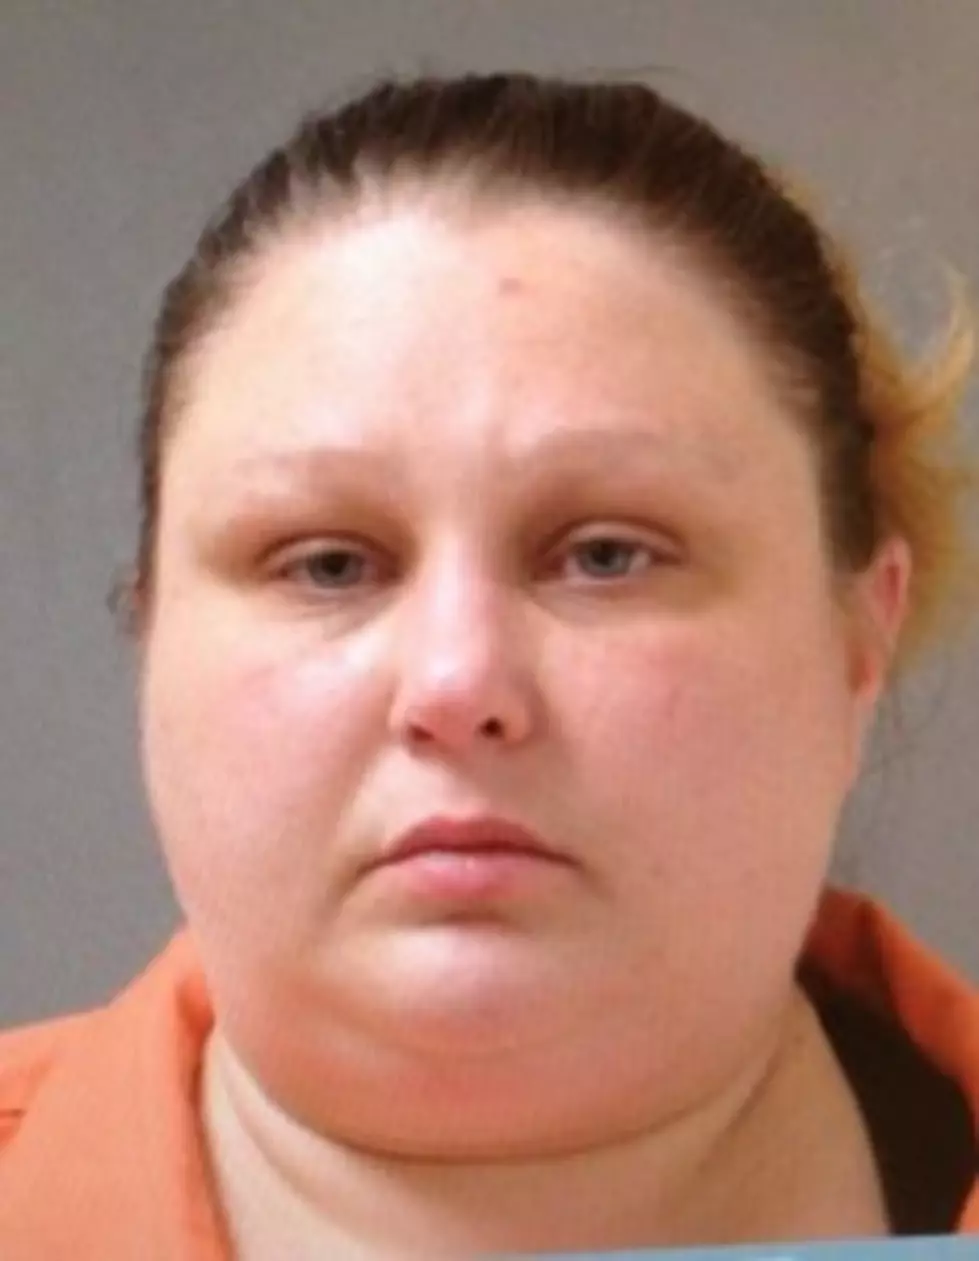 Eunice Woman Arrested On Drug Charges, BMW Seized Second Time